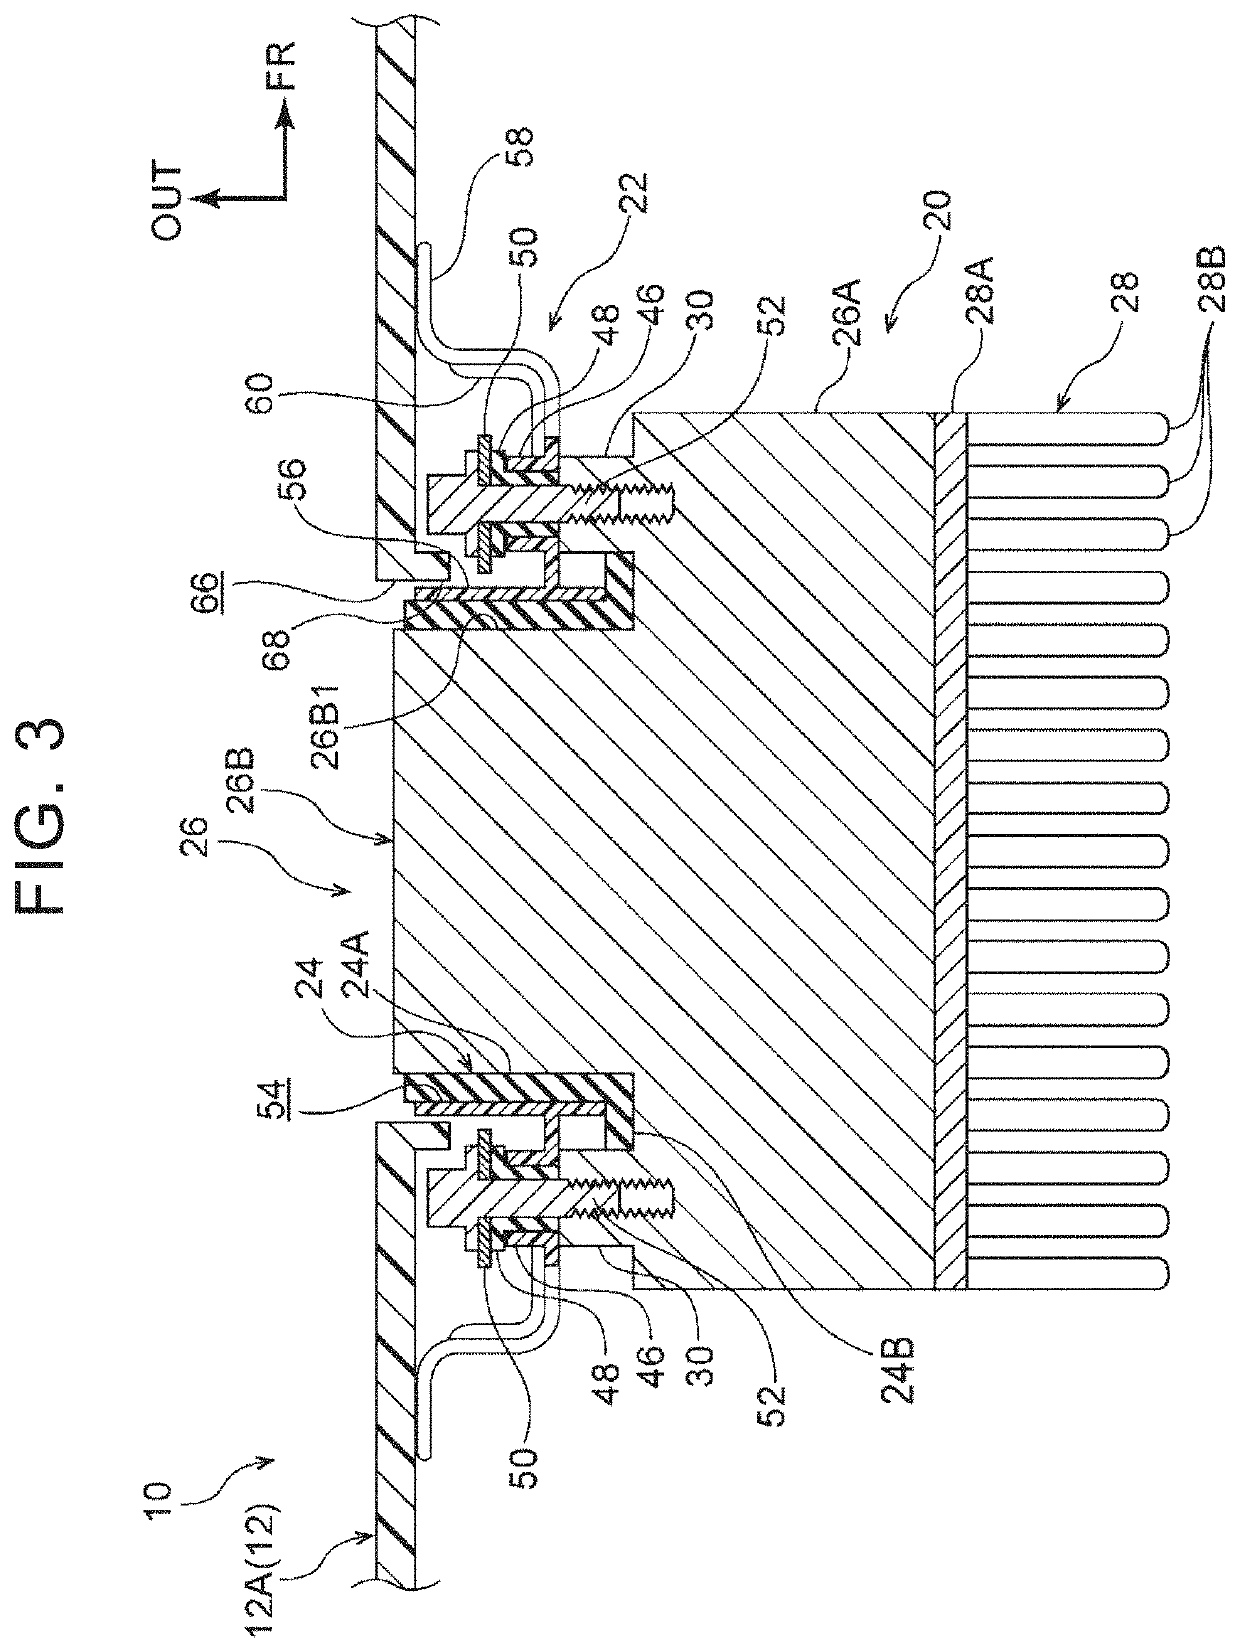 Installation structure for vicinity information detection sensor